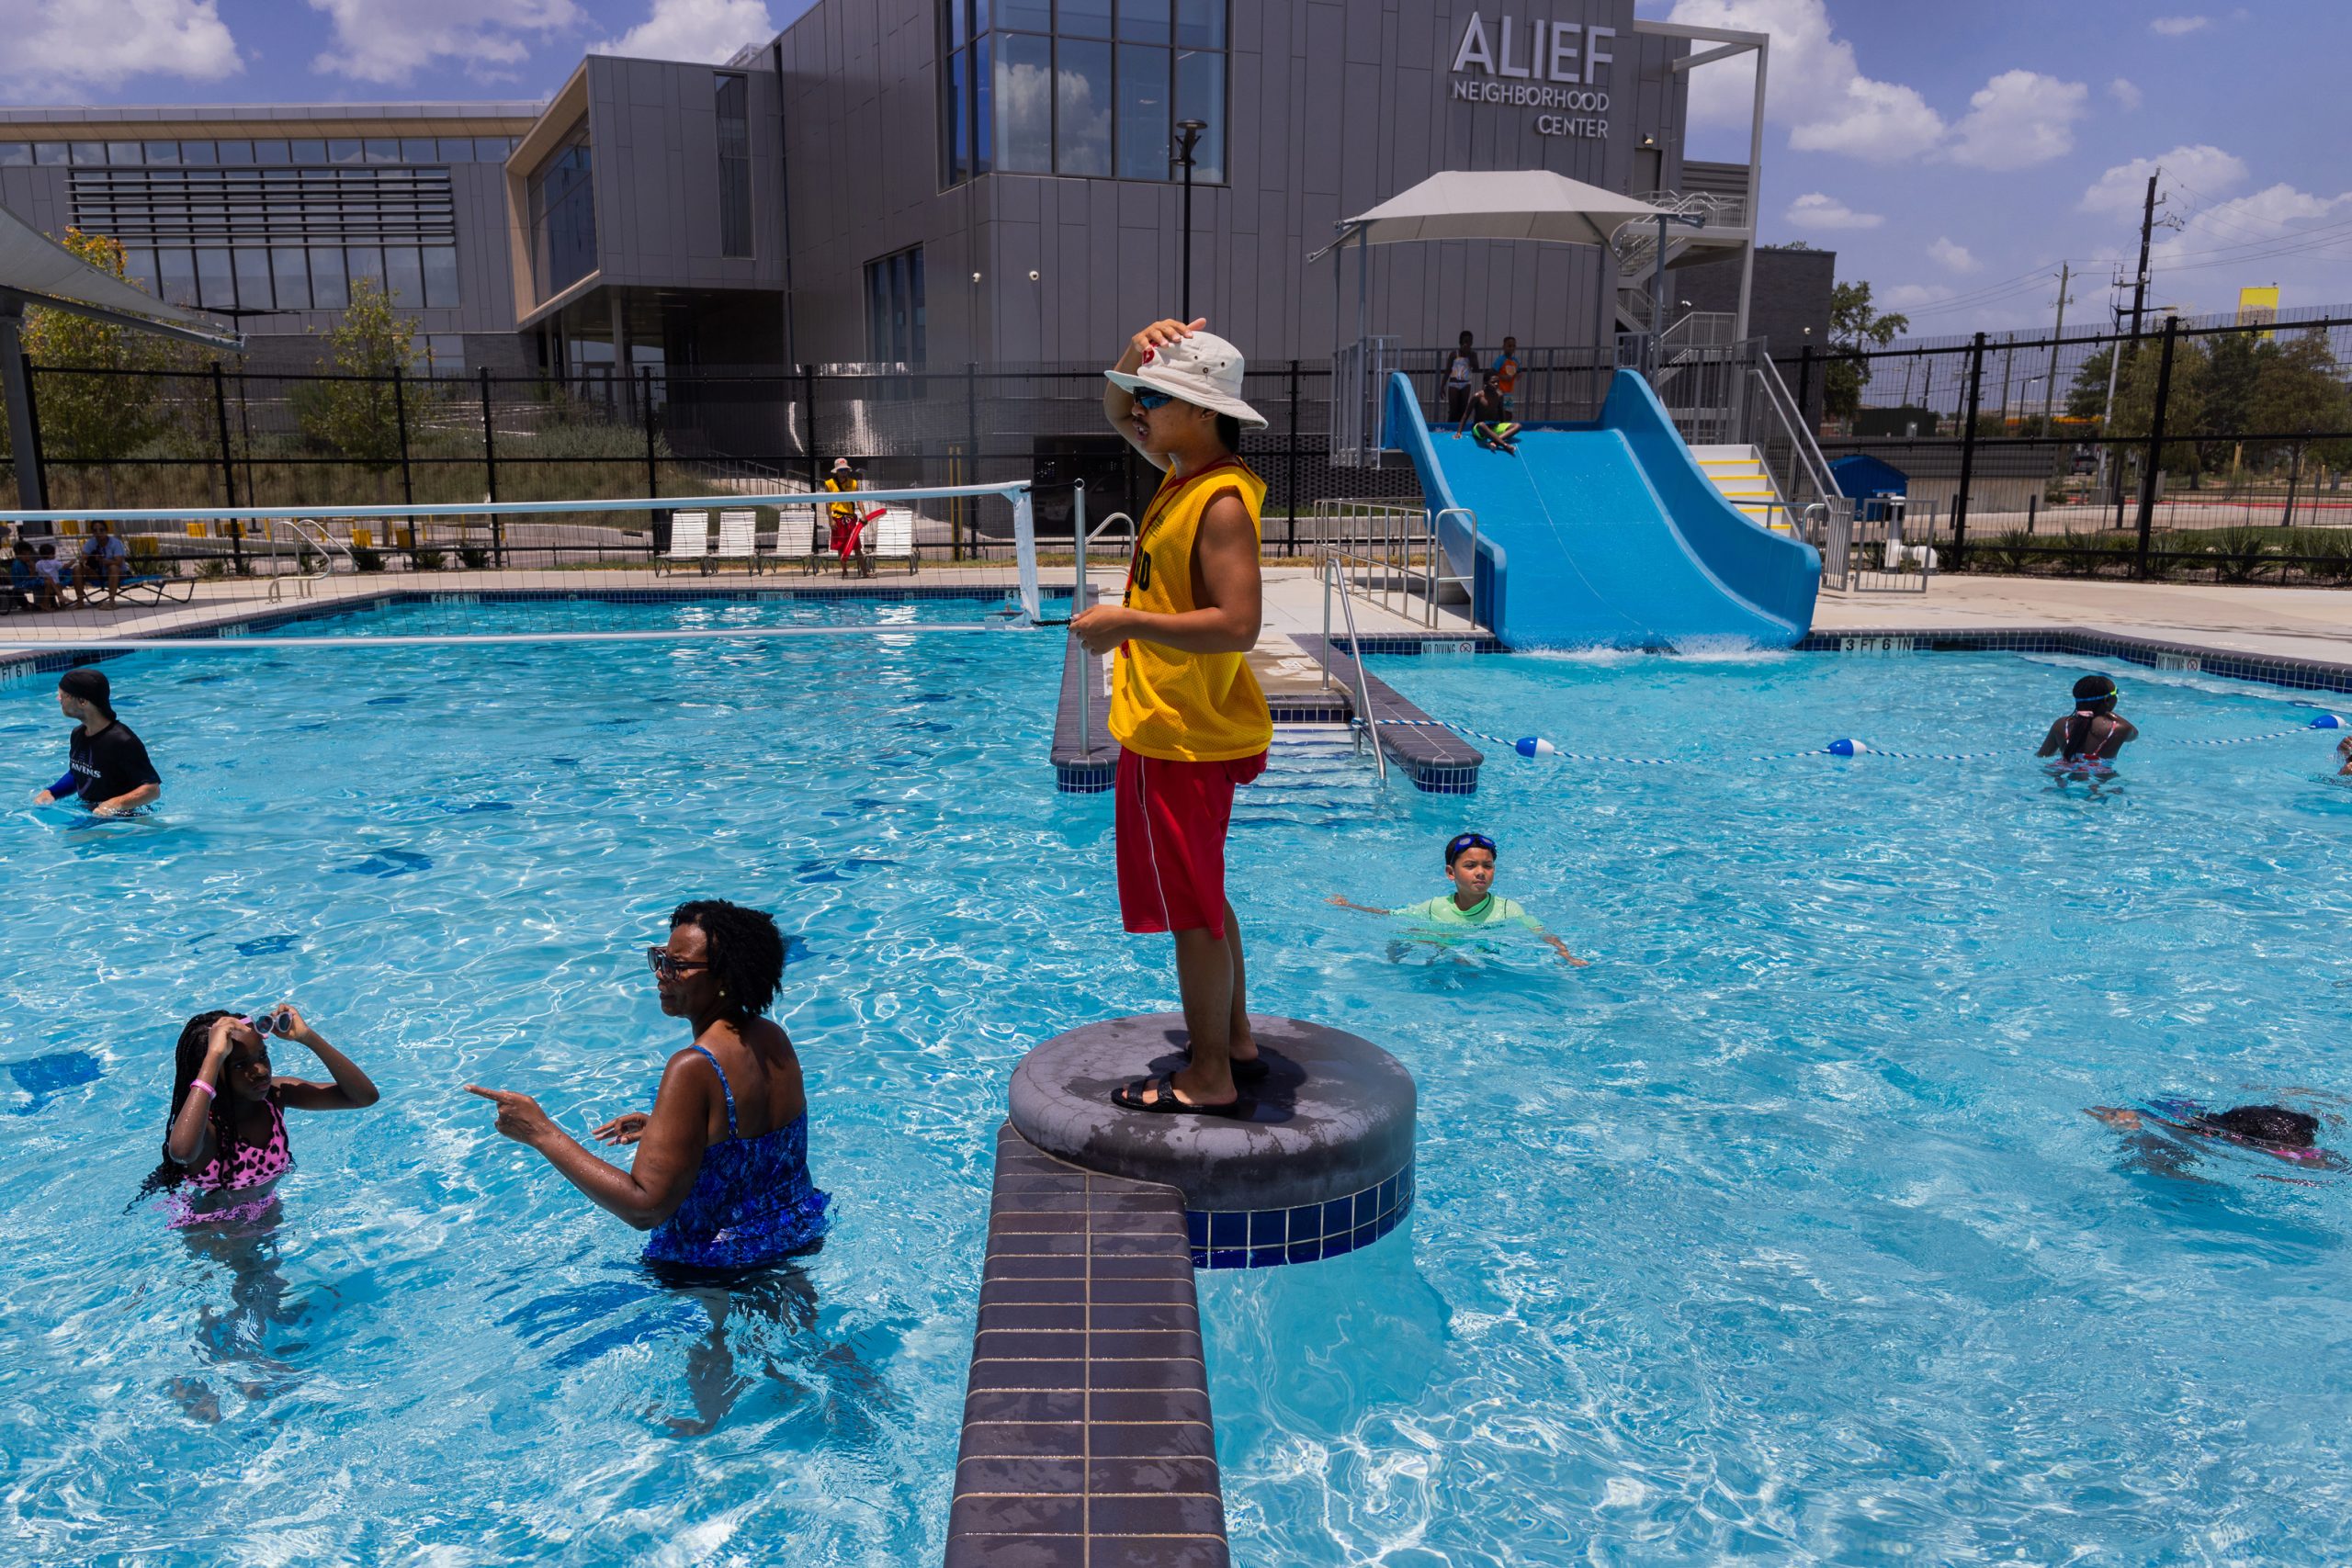 An Alief Neighborhood Center and Park pool lifeguard briefly removes bathers from the pool so the lifeguards can take a break